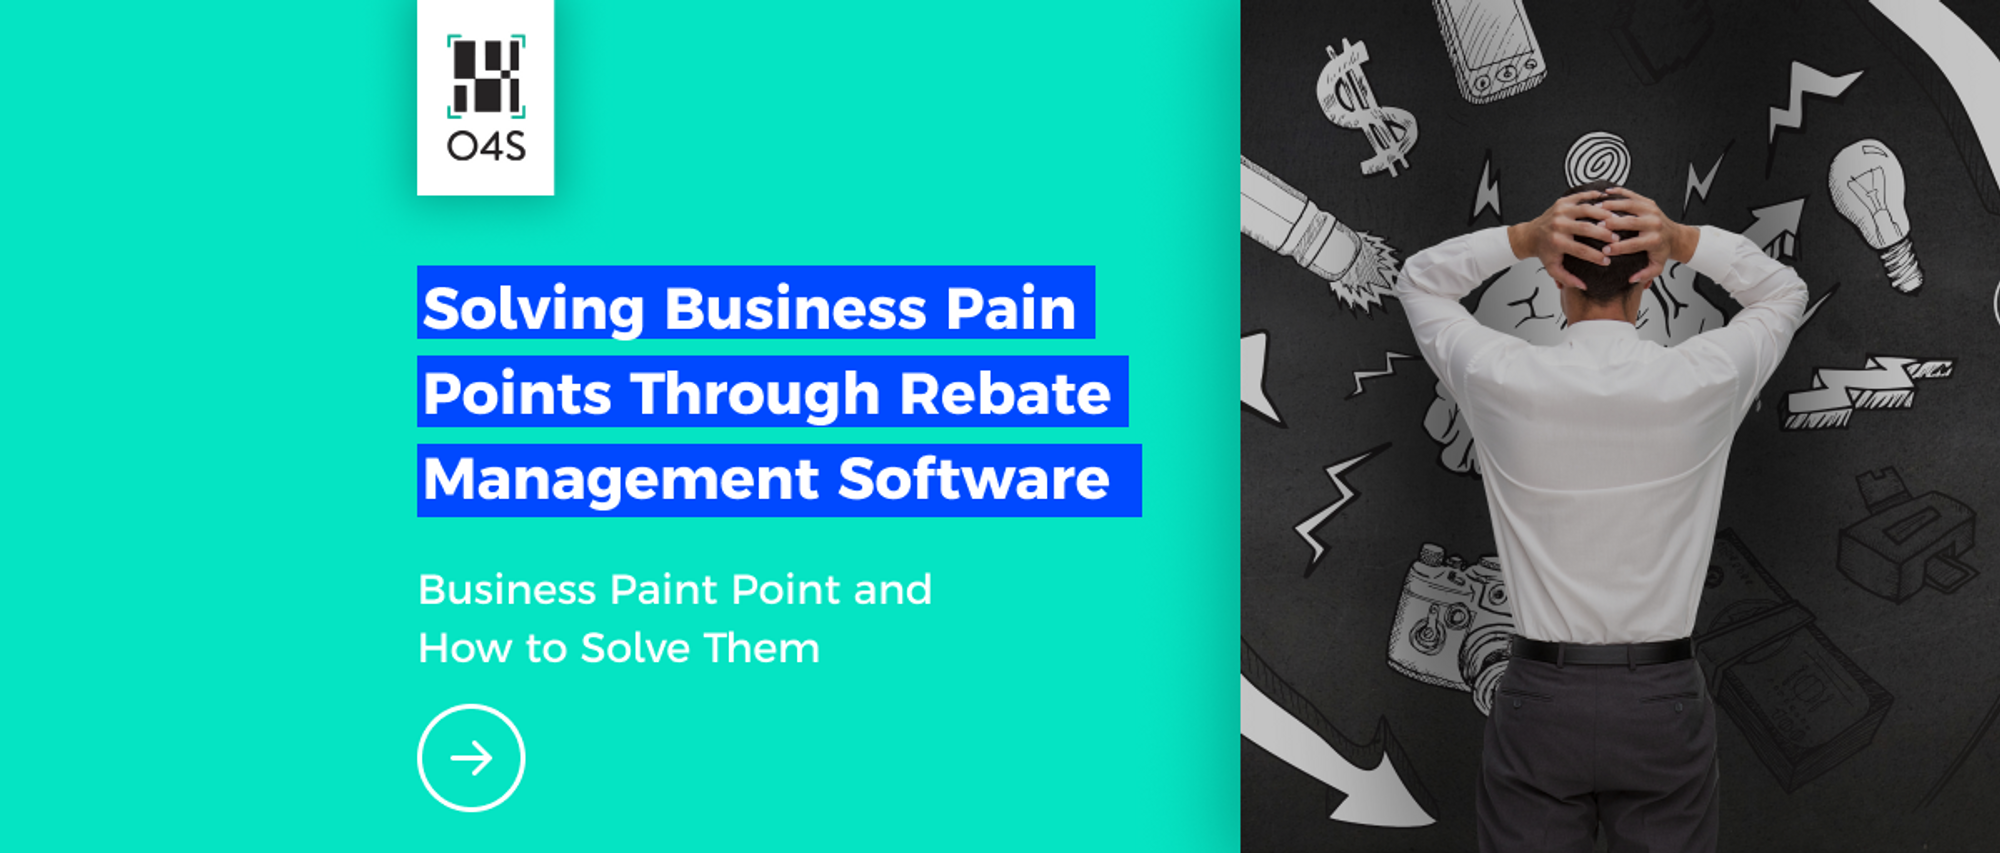 Business Pain Points Rebate Management Software Can Solve